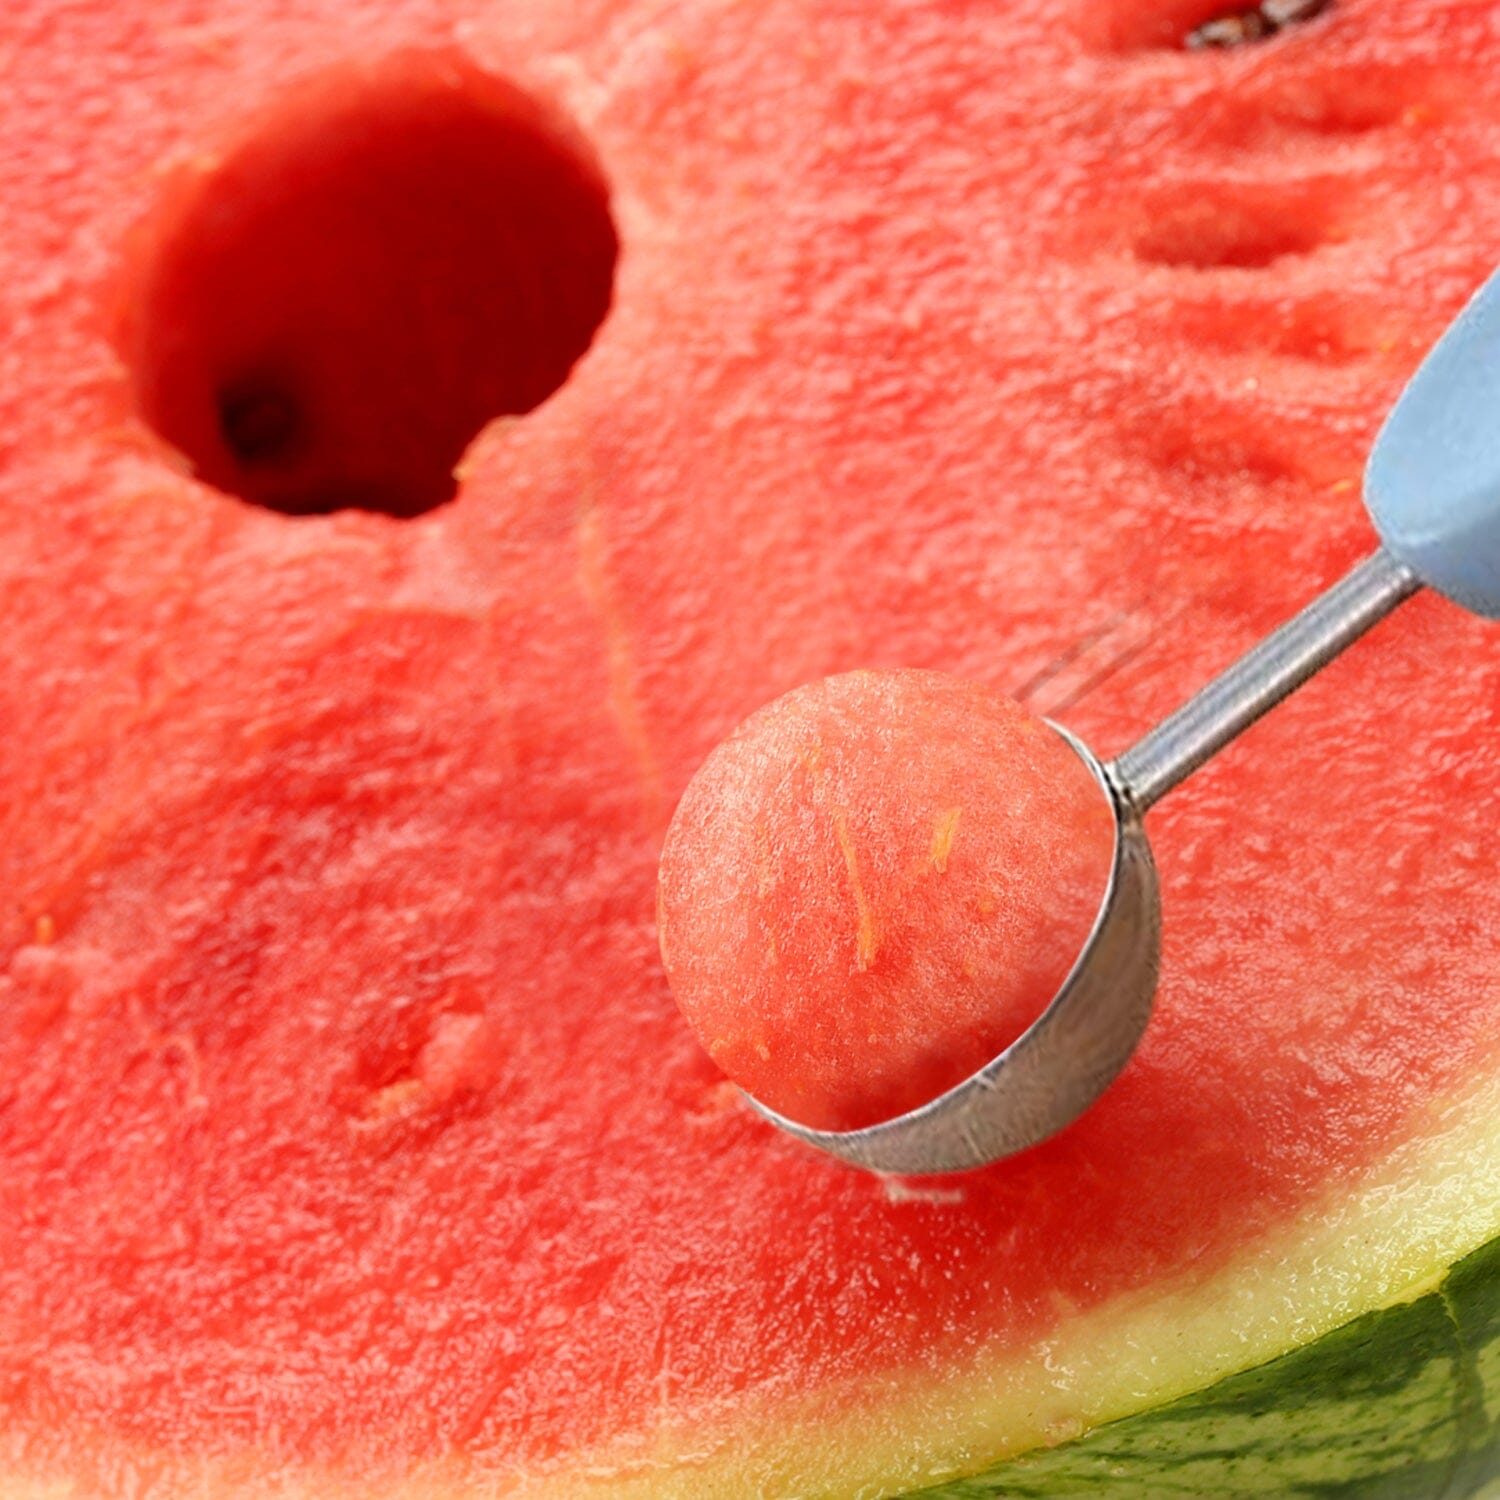 https://dailysale.com/cdn/shop/files/professional-3-in-1-stainless-steel-watermelon-melon-baller-scoop-seed-remover-fruit-carving-tool-set-kitchen-tools-gadgets-dailysale-395181.jpg?v=1698352049